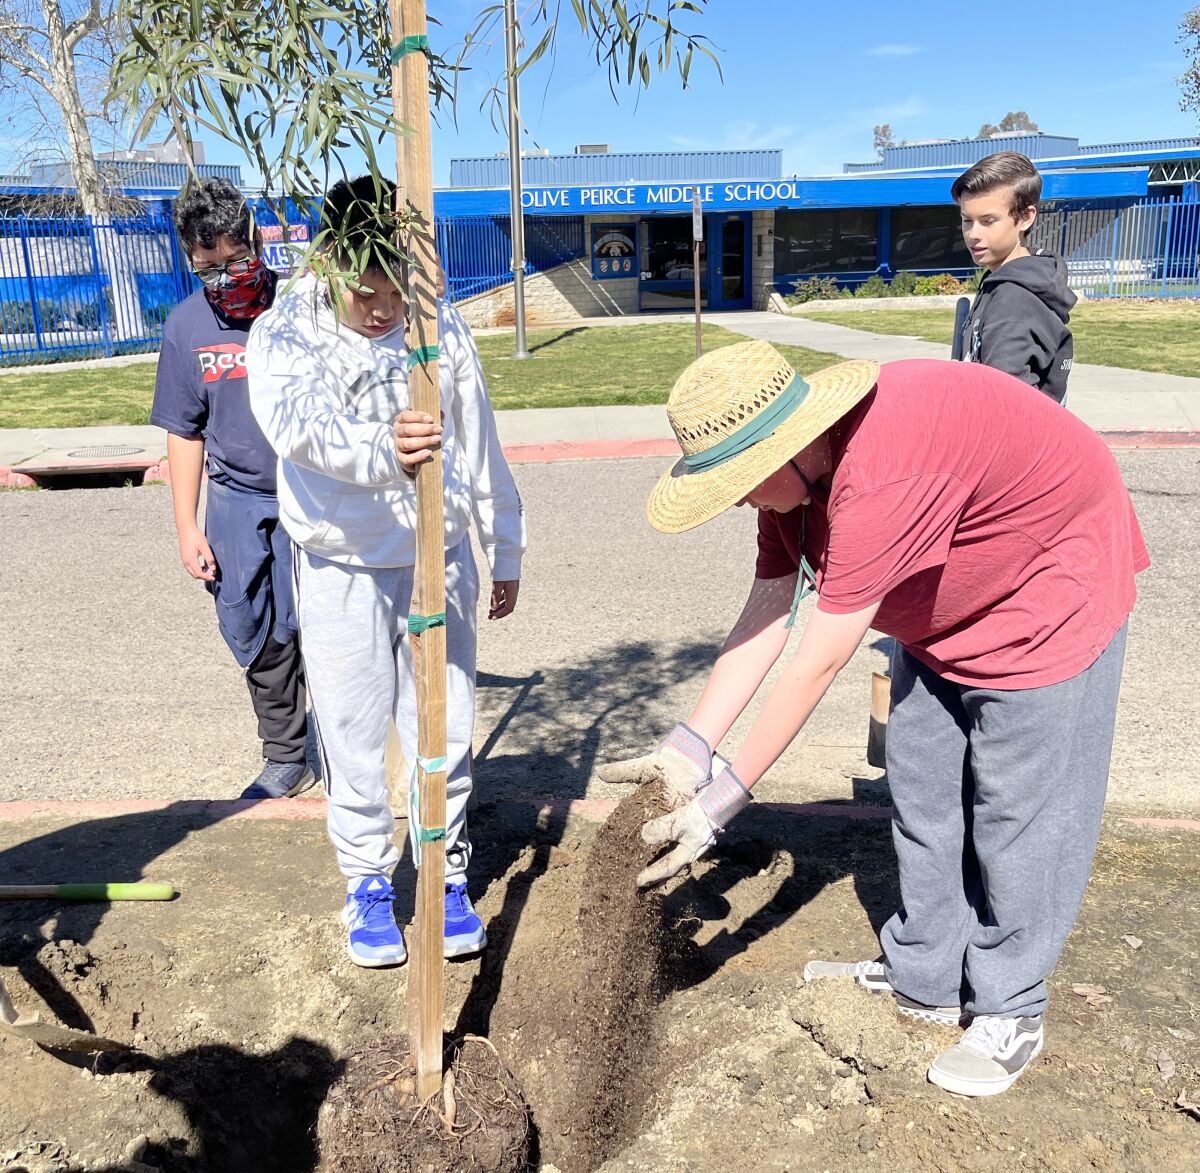 Students planting trees are, from left, Ivan Davalos-Villegas, Arnulfo Perez, Isaiah Lucas and Nathan Everard.